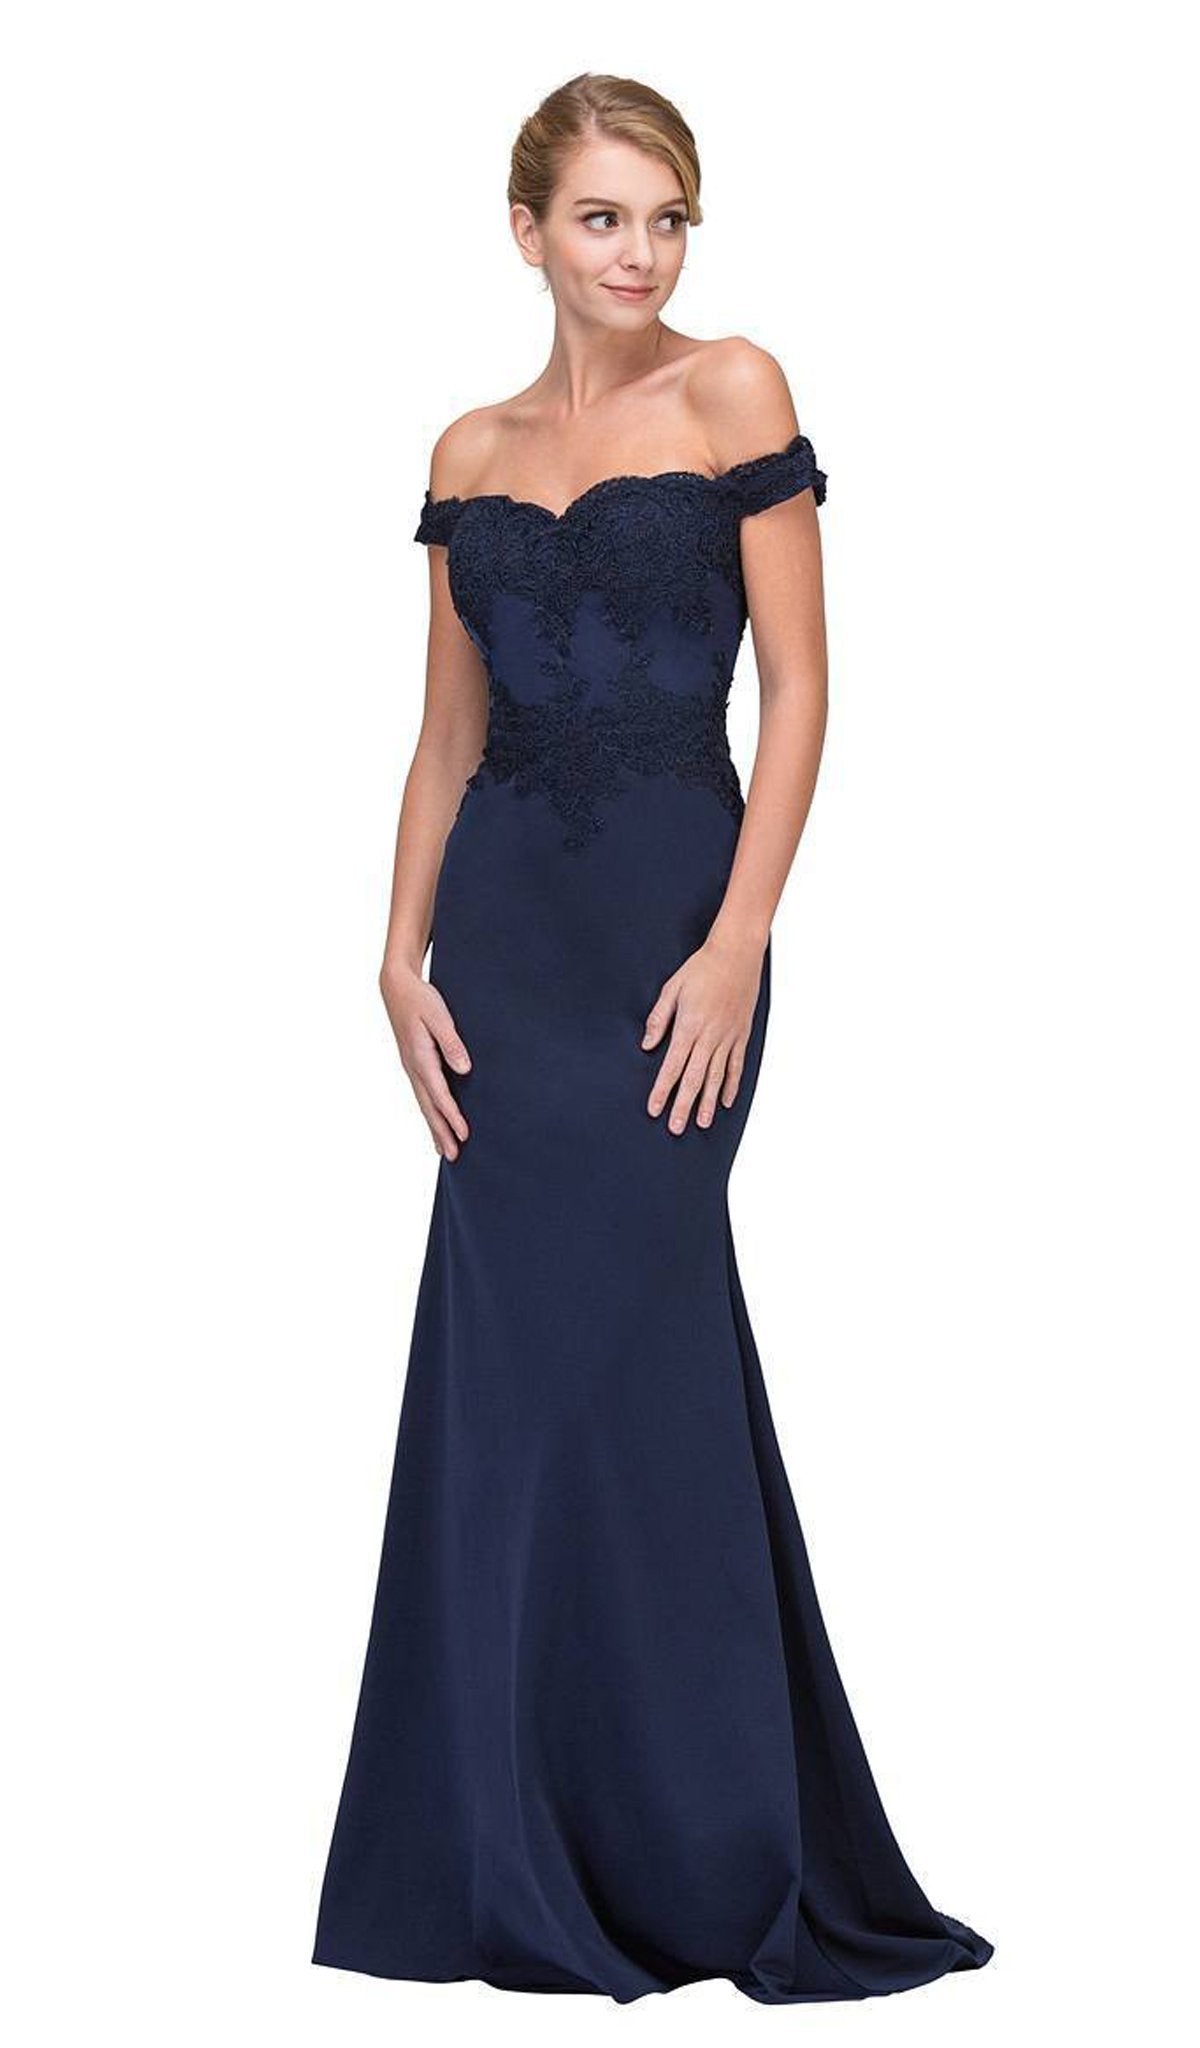 Eureka Fashion - Lace Applique Off Shoulder Jersey Mermaid Gown In Blue